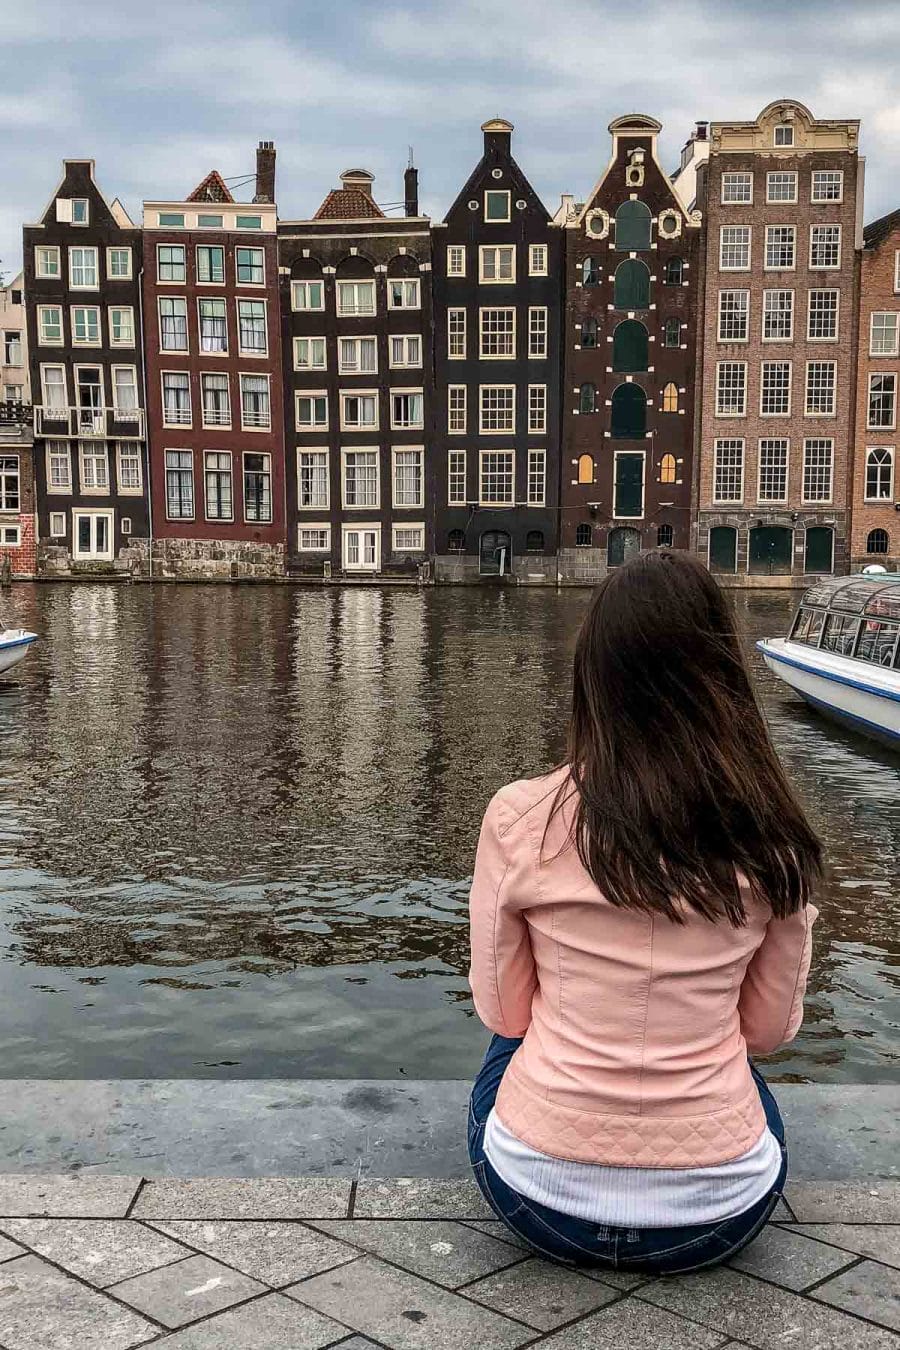 Girl in a pink jacket sitting in front of the crooked houses in Amsterdam